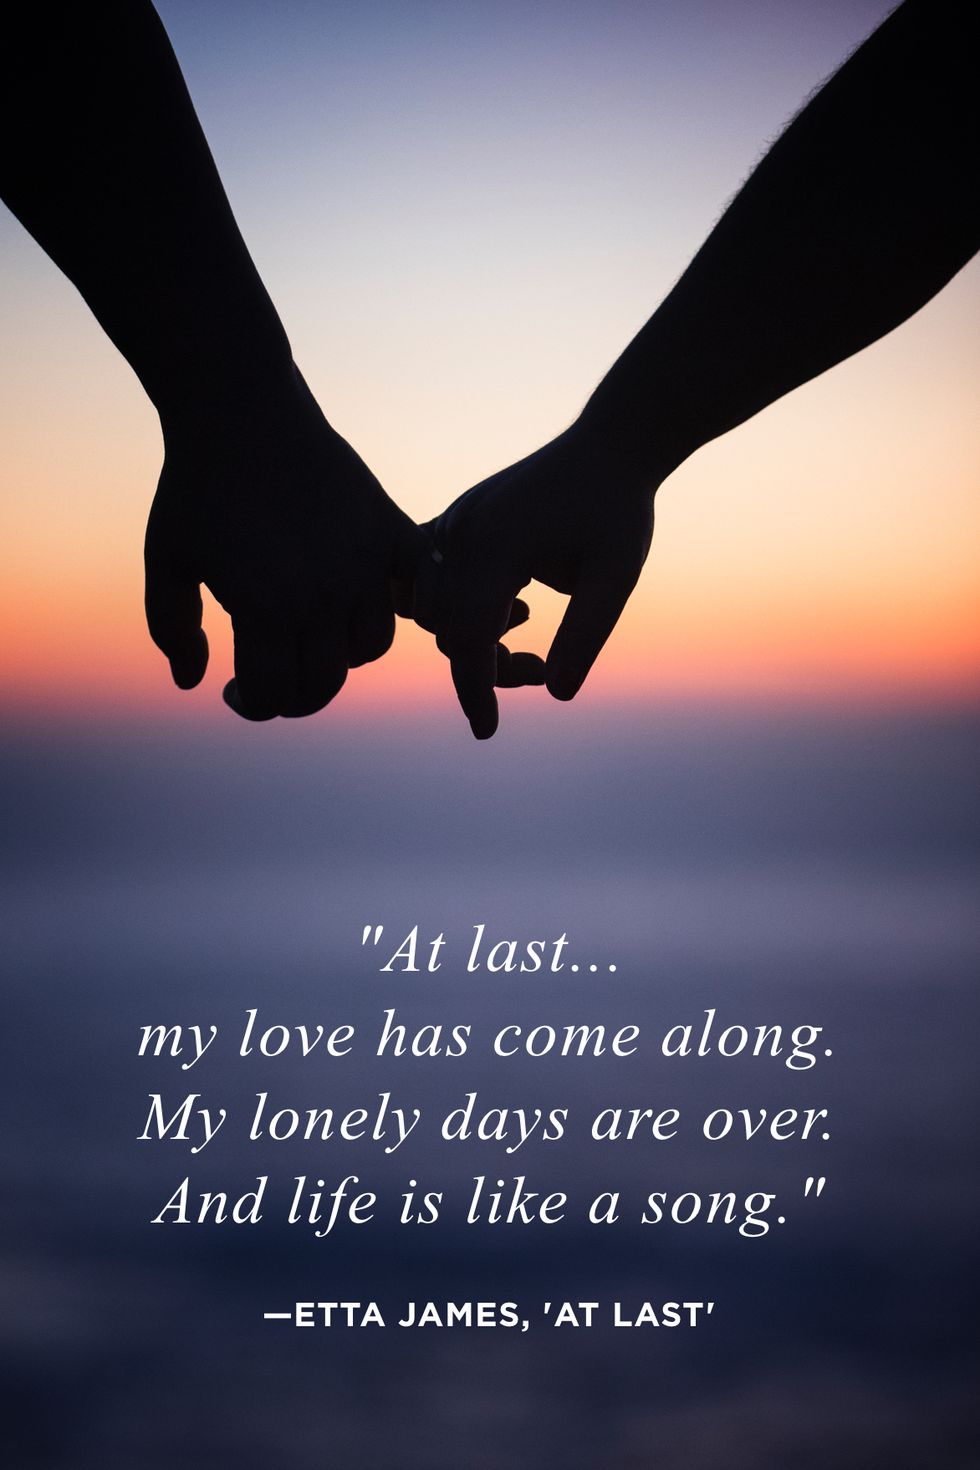 Quotes about Love : Love lyrics - To make you feel my love…